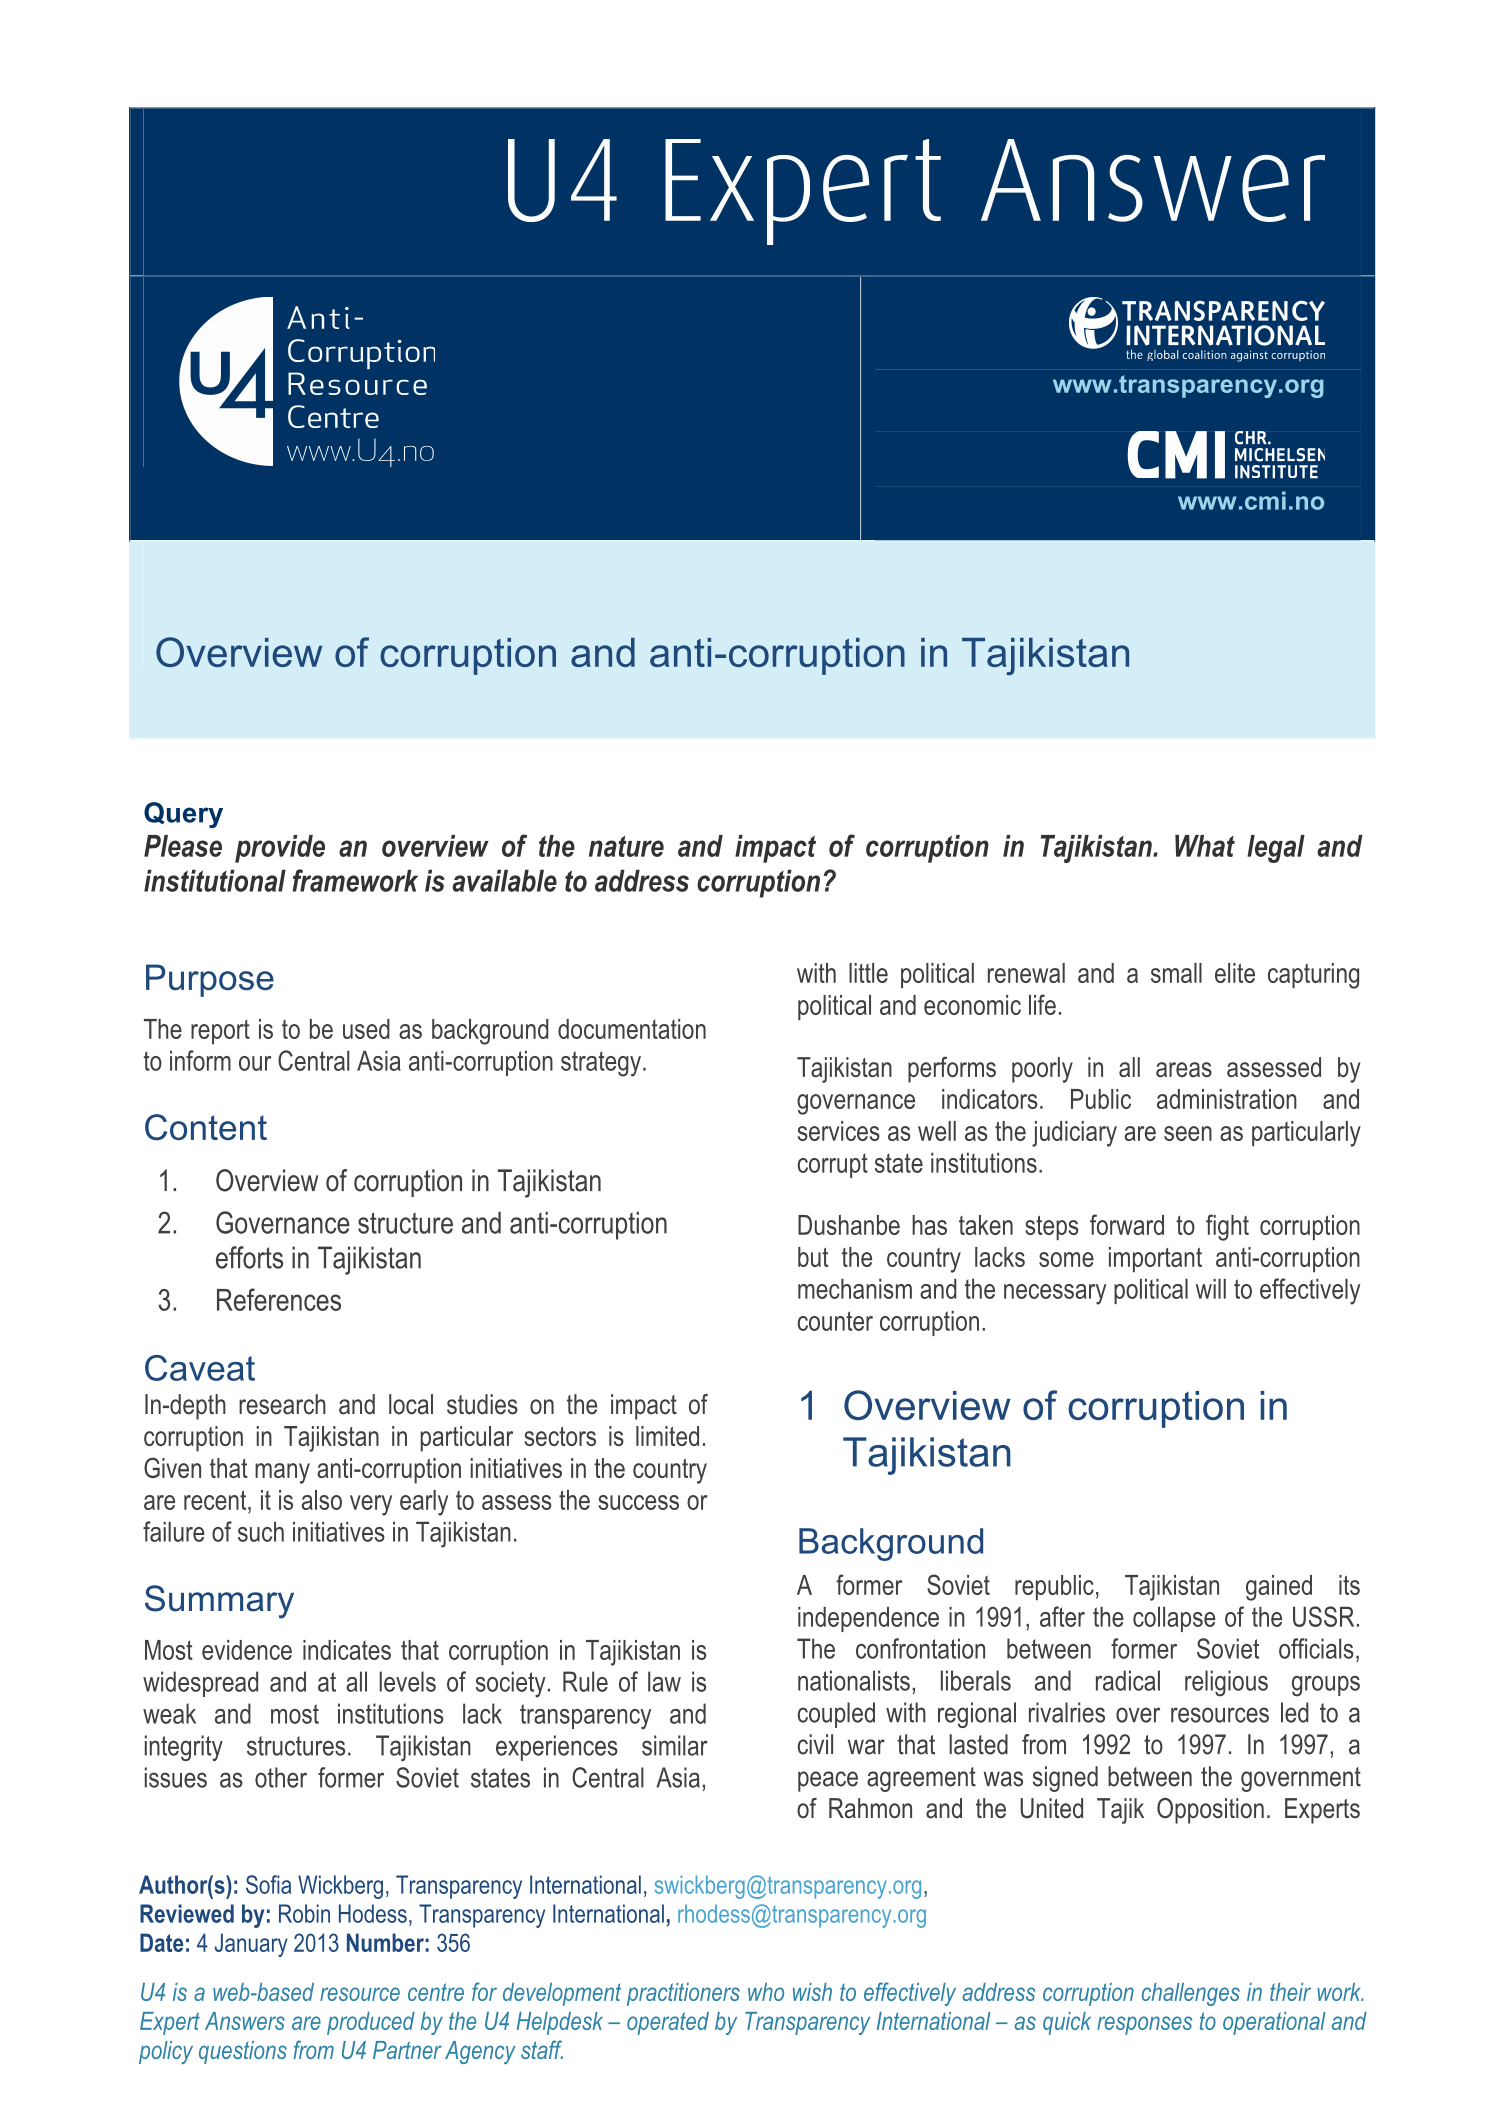 Overview of corruption and anti-corruption in Tajikistan